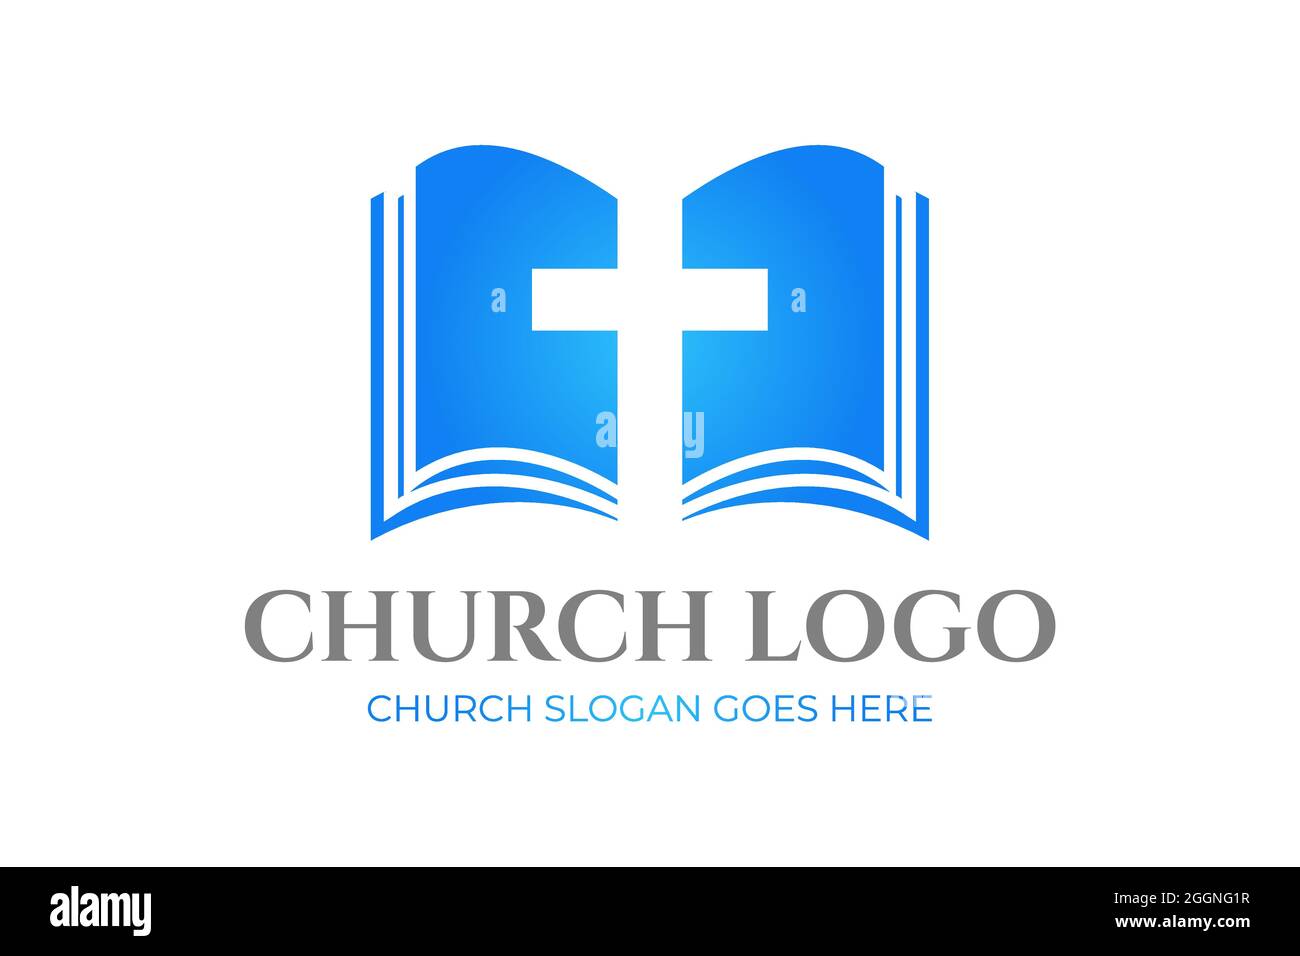 Church Logo Design with Bible and Cross Stock Vector